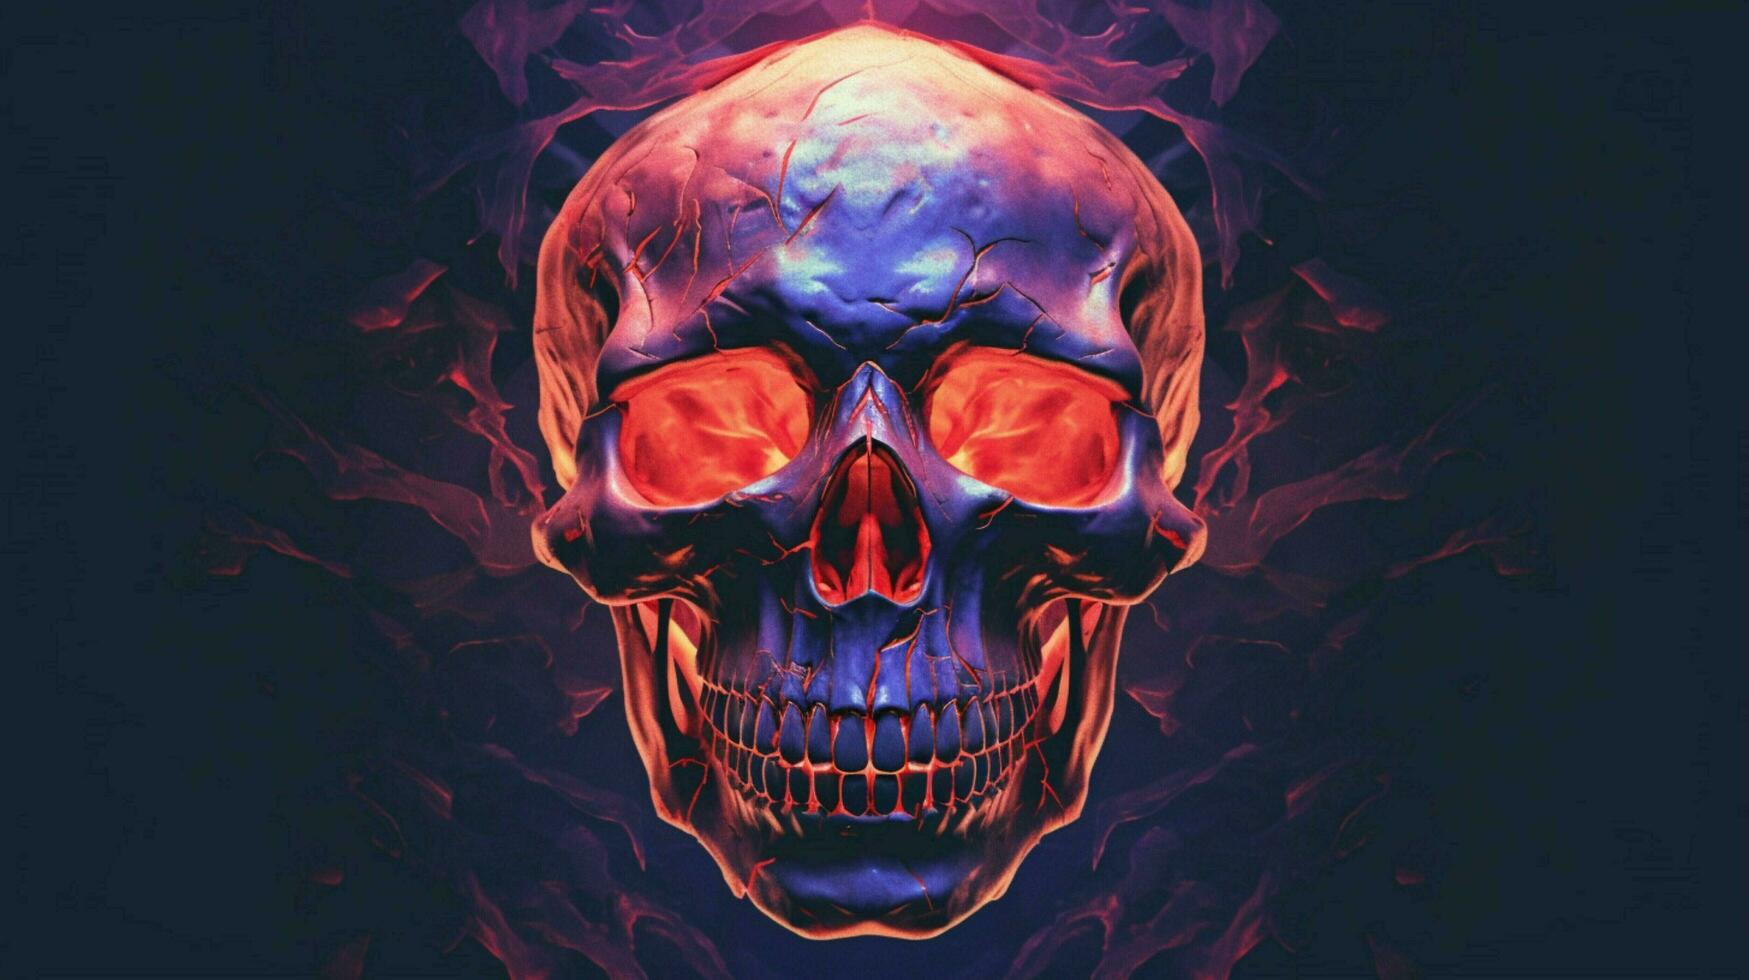 a poster for a video game called the skull photo